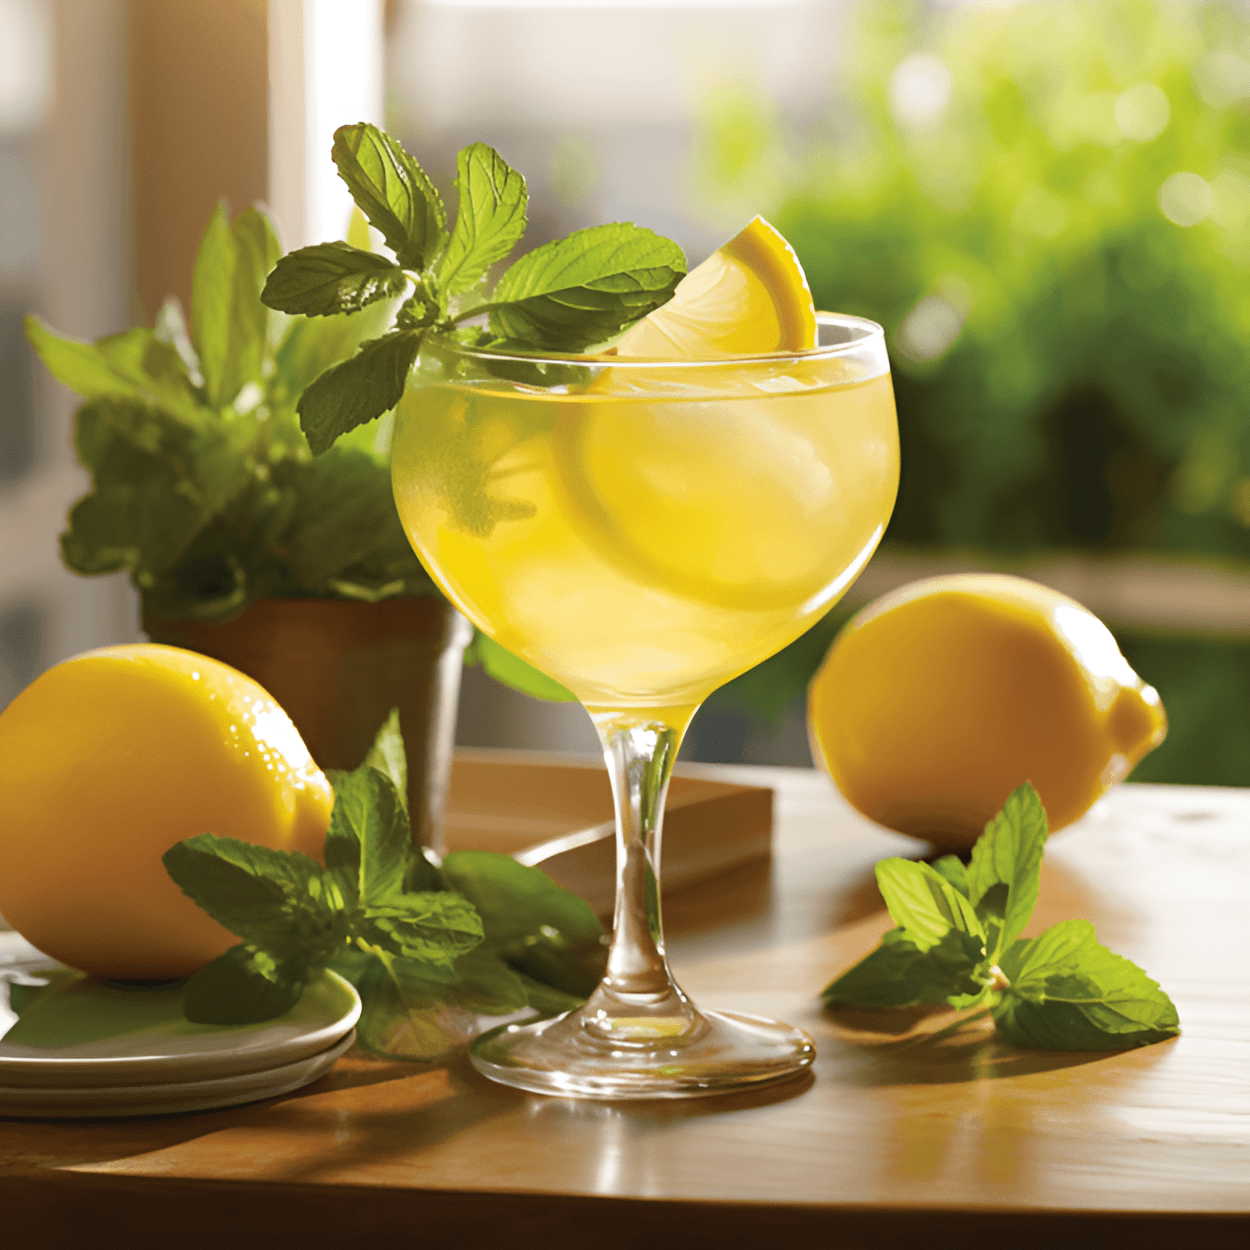 Lemon Shrub Cocktail Recipe - The Lemon Shrub cocktail is a perfect balance of tart, sweet, and slightly bitter. The lemon gives it a fresh, citrusy tang, while the sugar adds a hint of sweetness. The vinegar provides a unique, slightly sour note that cuts through the sweetness and leaves a refreshing aftertaste.